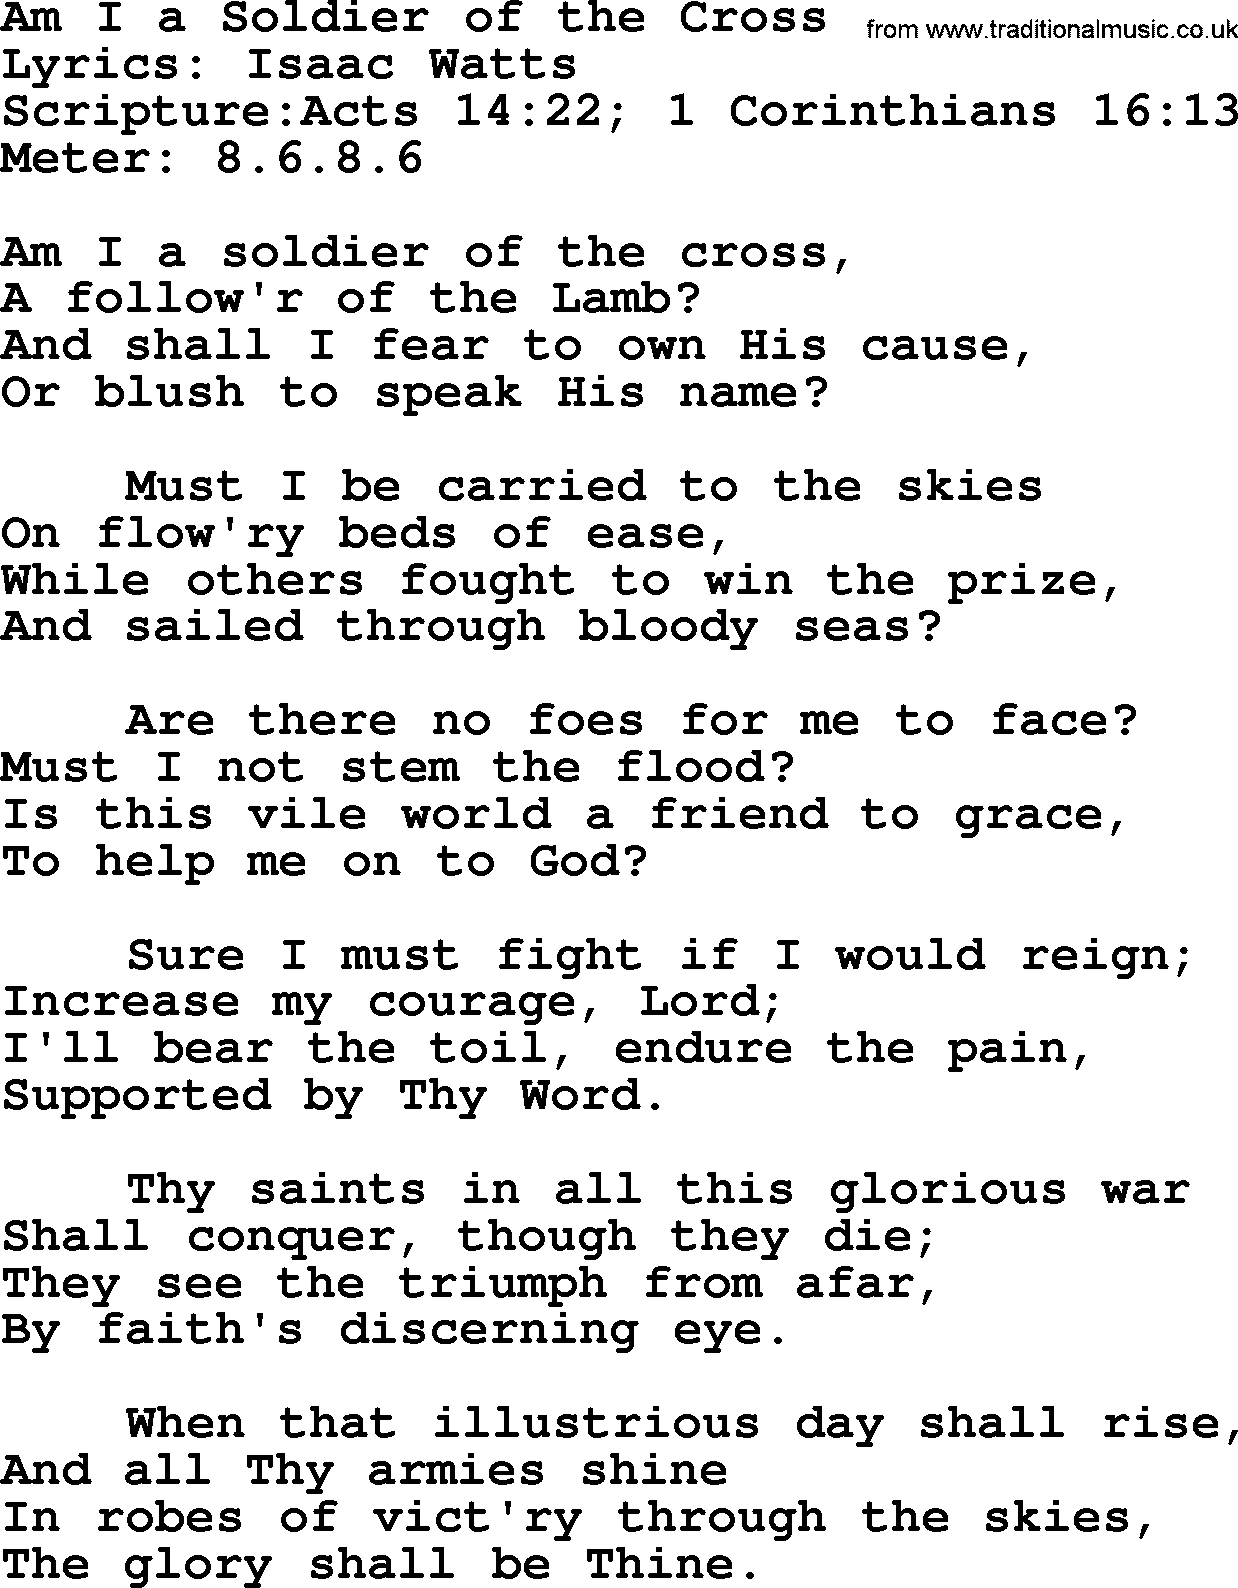 A collection of 500+ most sung Christian church hymns and songs, title: Am I A Soldier Of The Cross, lyrics, PPTX and PDF